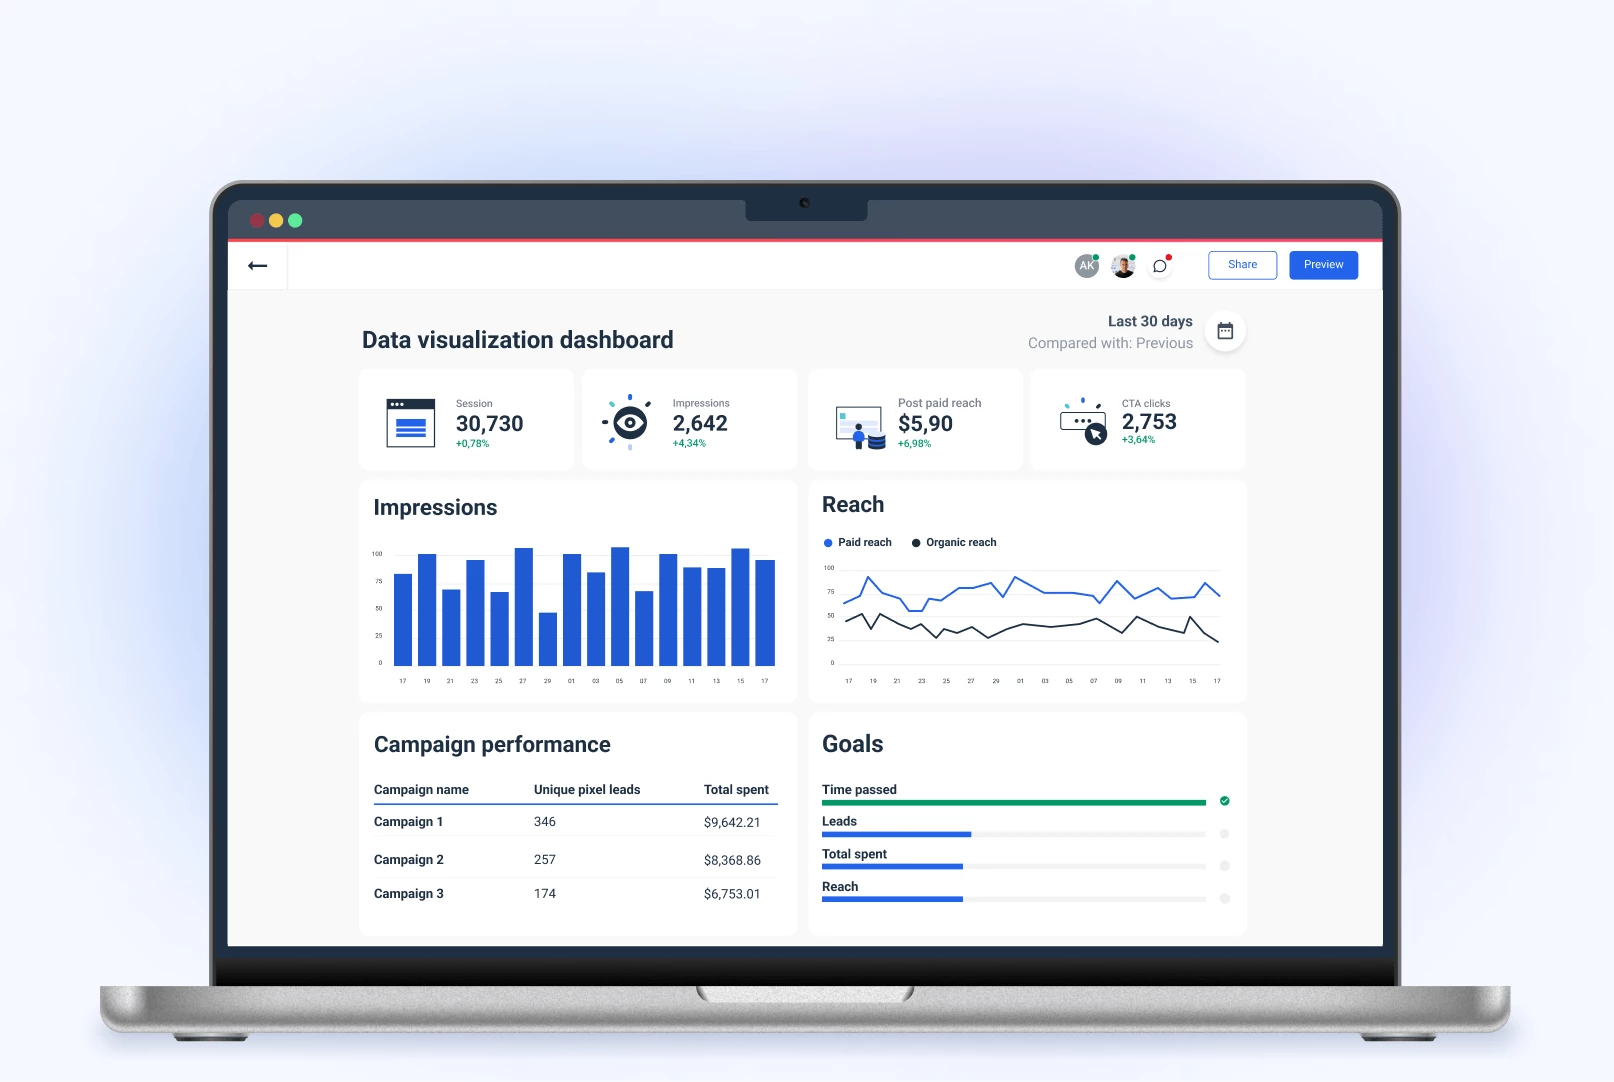 The Perfect Data Visualization Dashboard for Agencies